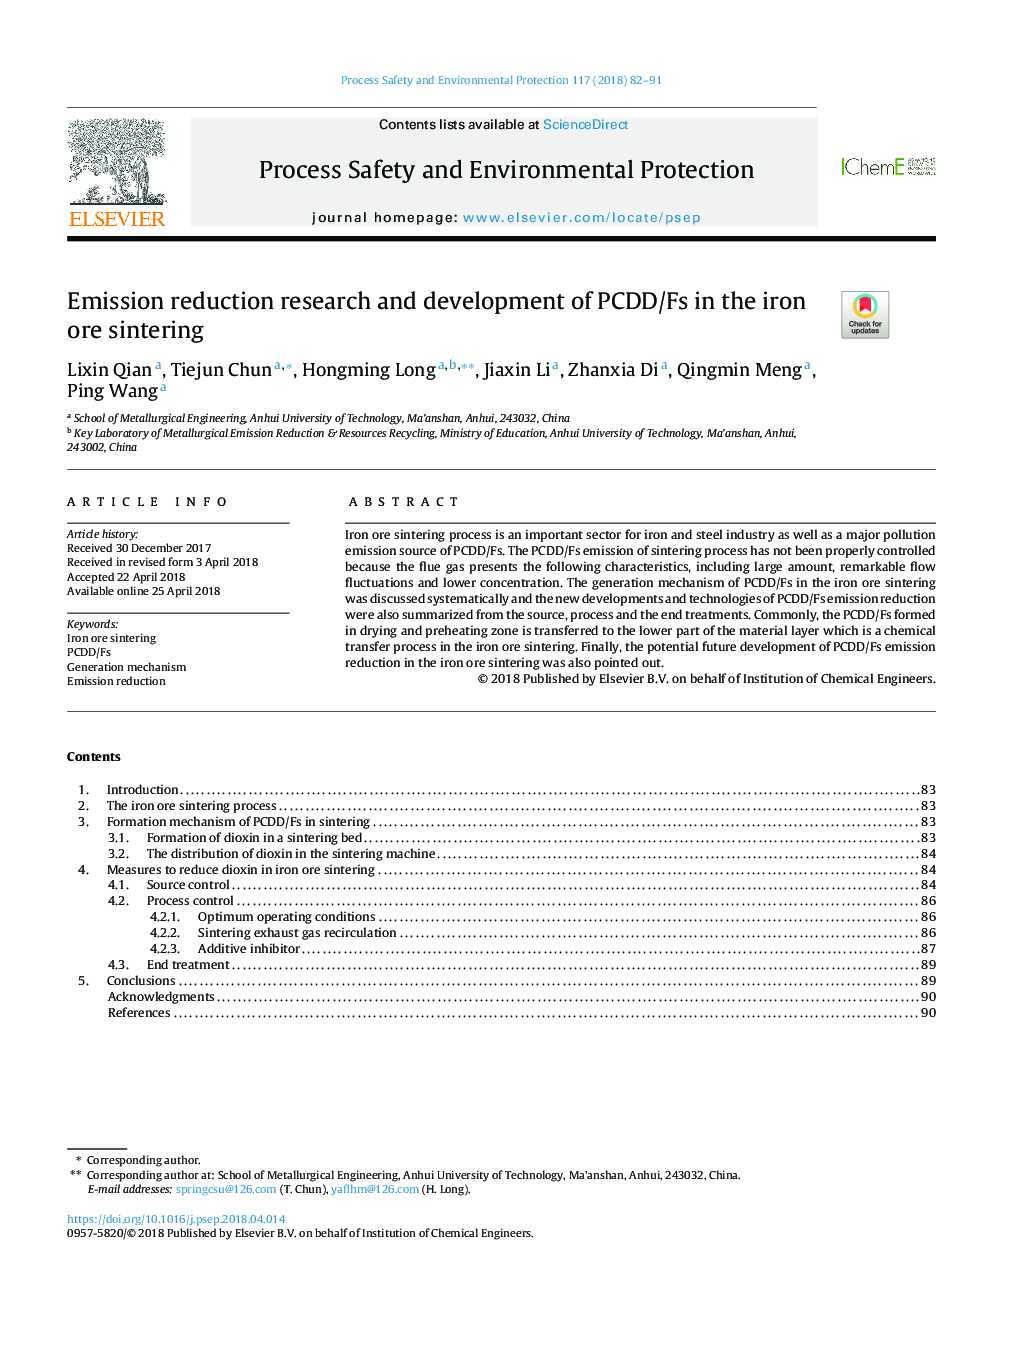 Emission reduction research and development of PCDD/Fs in the iron ore sintering